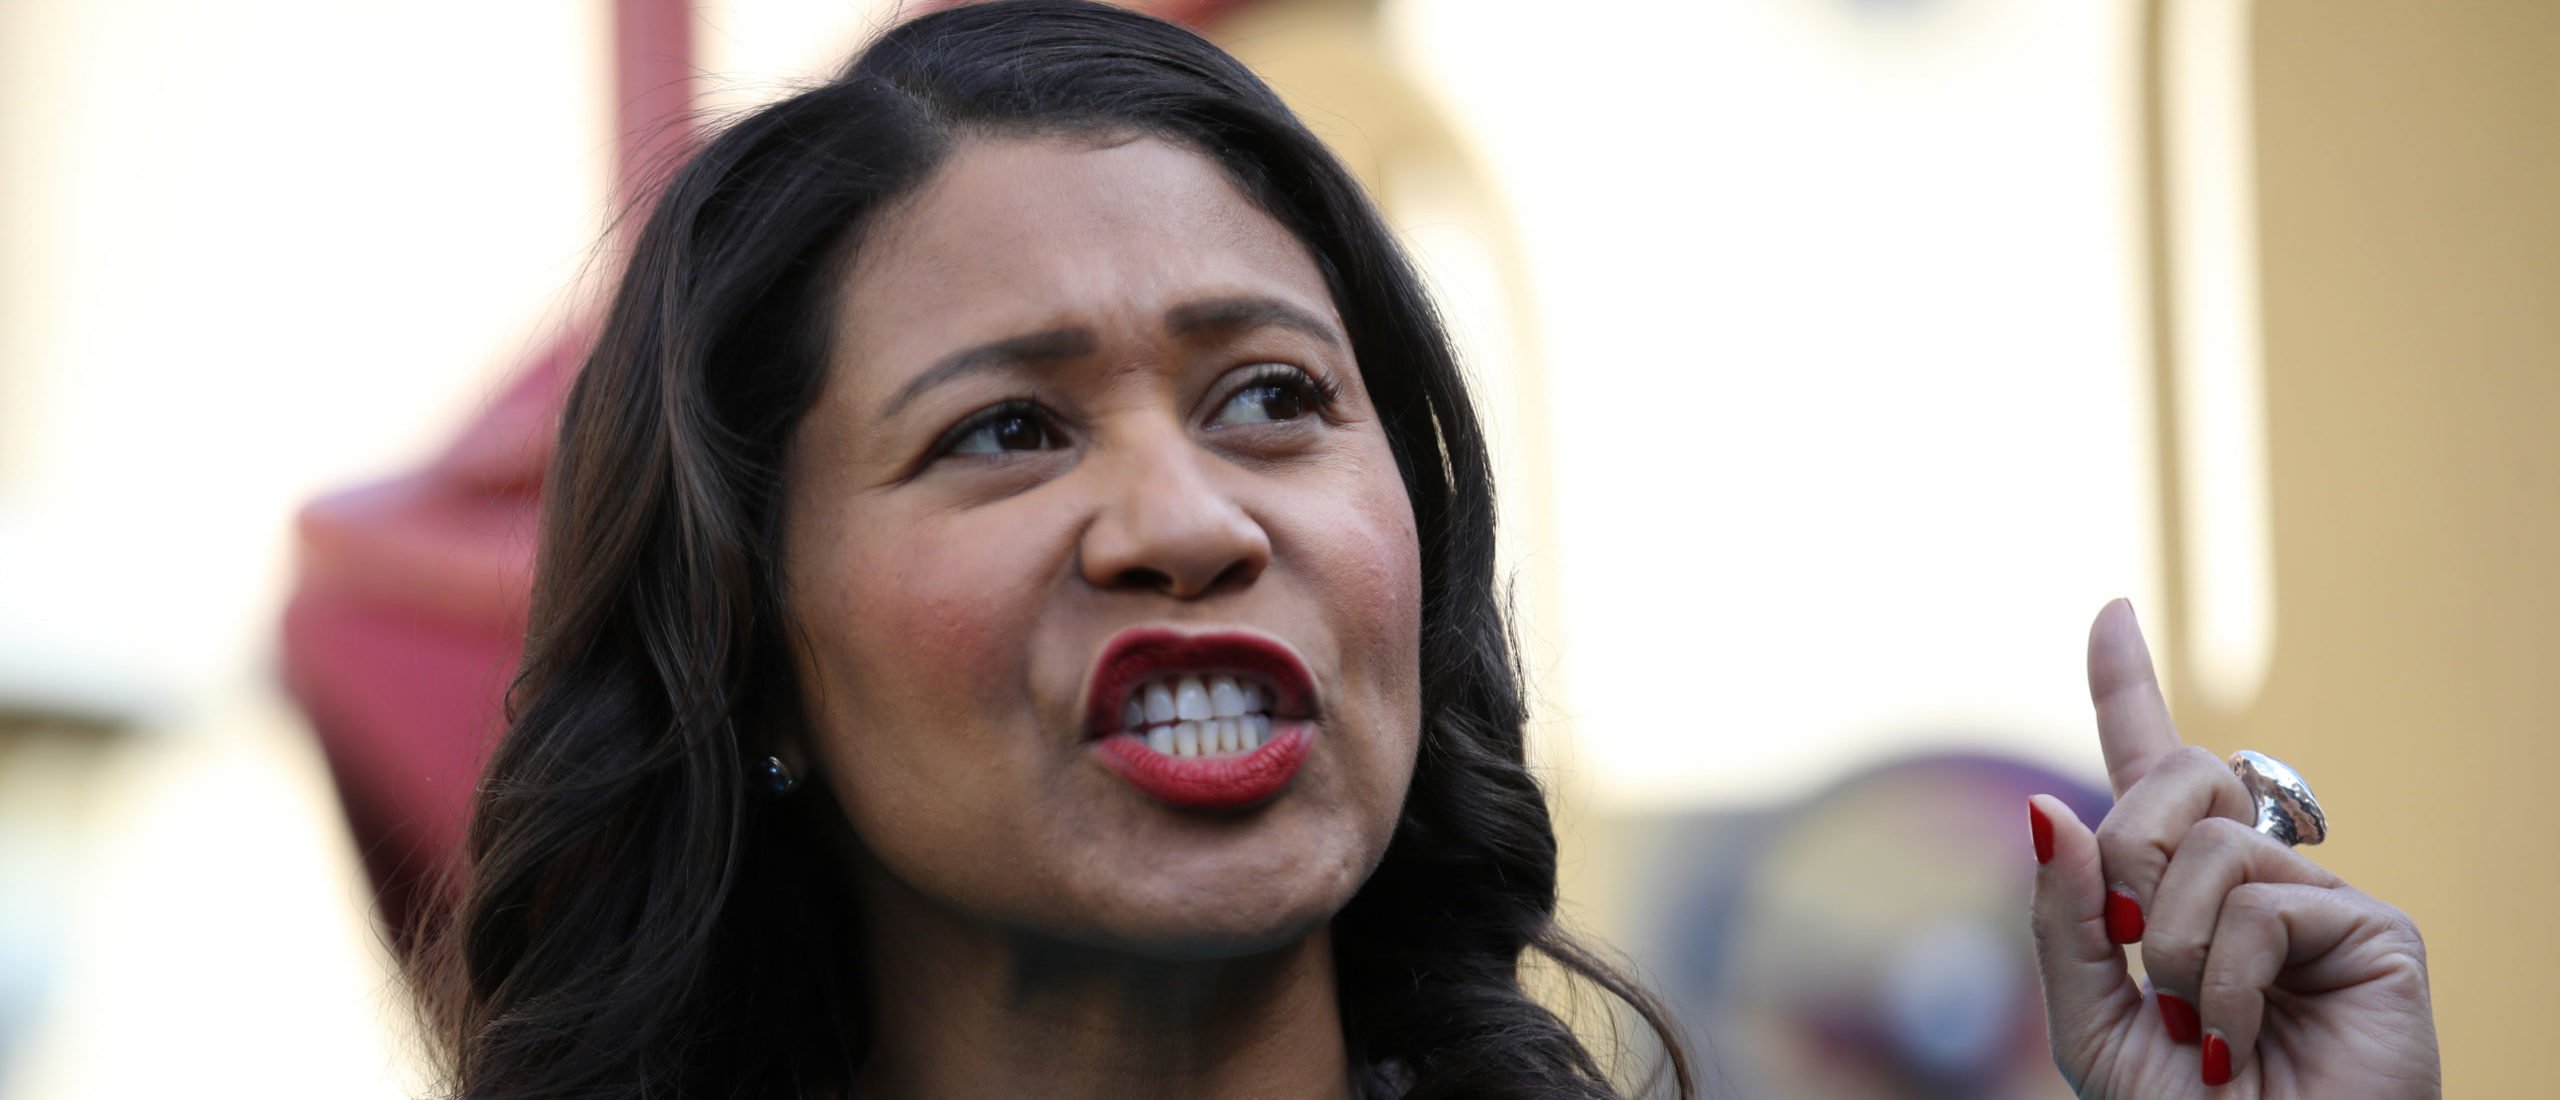 SAN FRANCISCO, CALIFORNIA - NOVEMBER 21: San Francisco mayor London Breed speaks during a press conference at Hamilton Families on November 21, 2019 in San Francisco, California. YouTube CEO Susan Wojcicki and her husband Dennis Troper joined Breed and Google.org representatives to announce that they would be donating a combined $1.35 million to Hamilton Families, a San Francisco based non-profit that provides long-term housing solutions to homeless families. (Photo by Justin Sullivan/Getty Images)